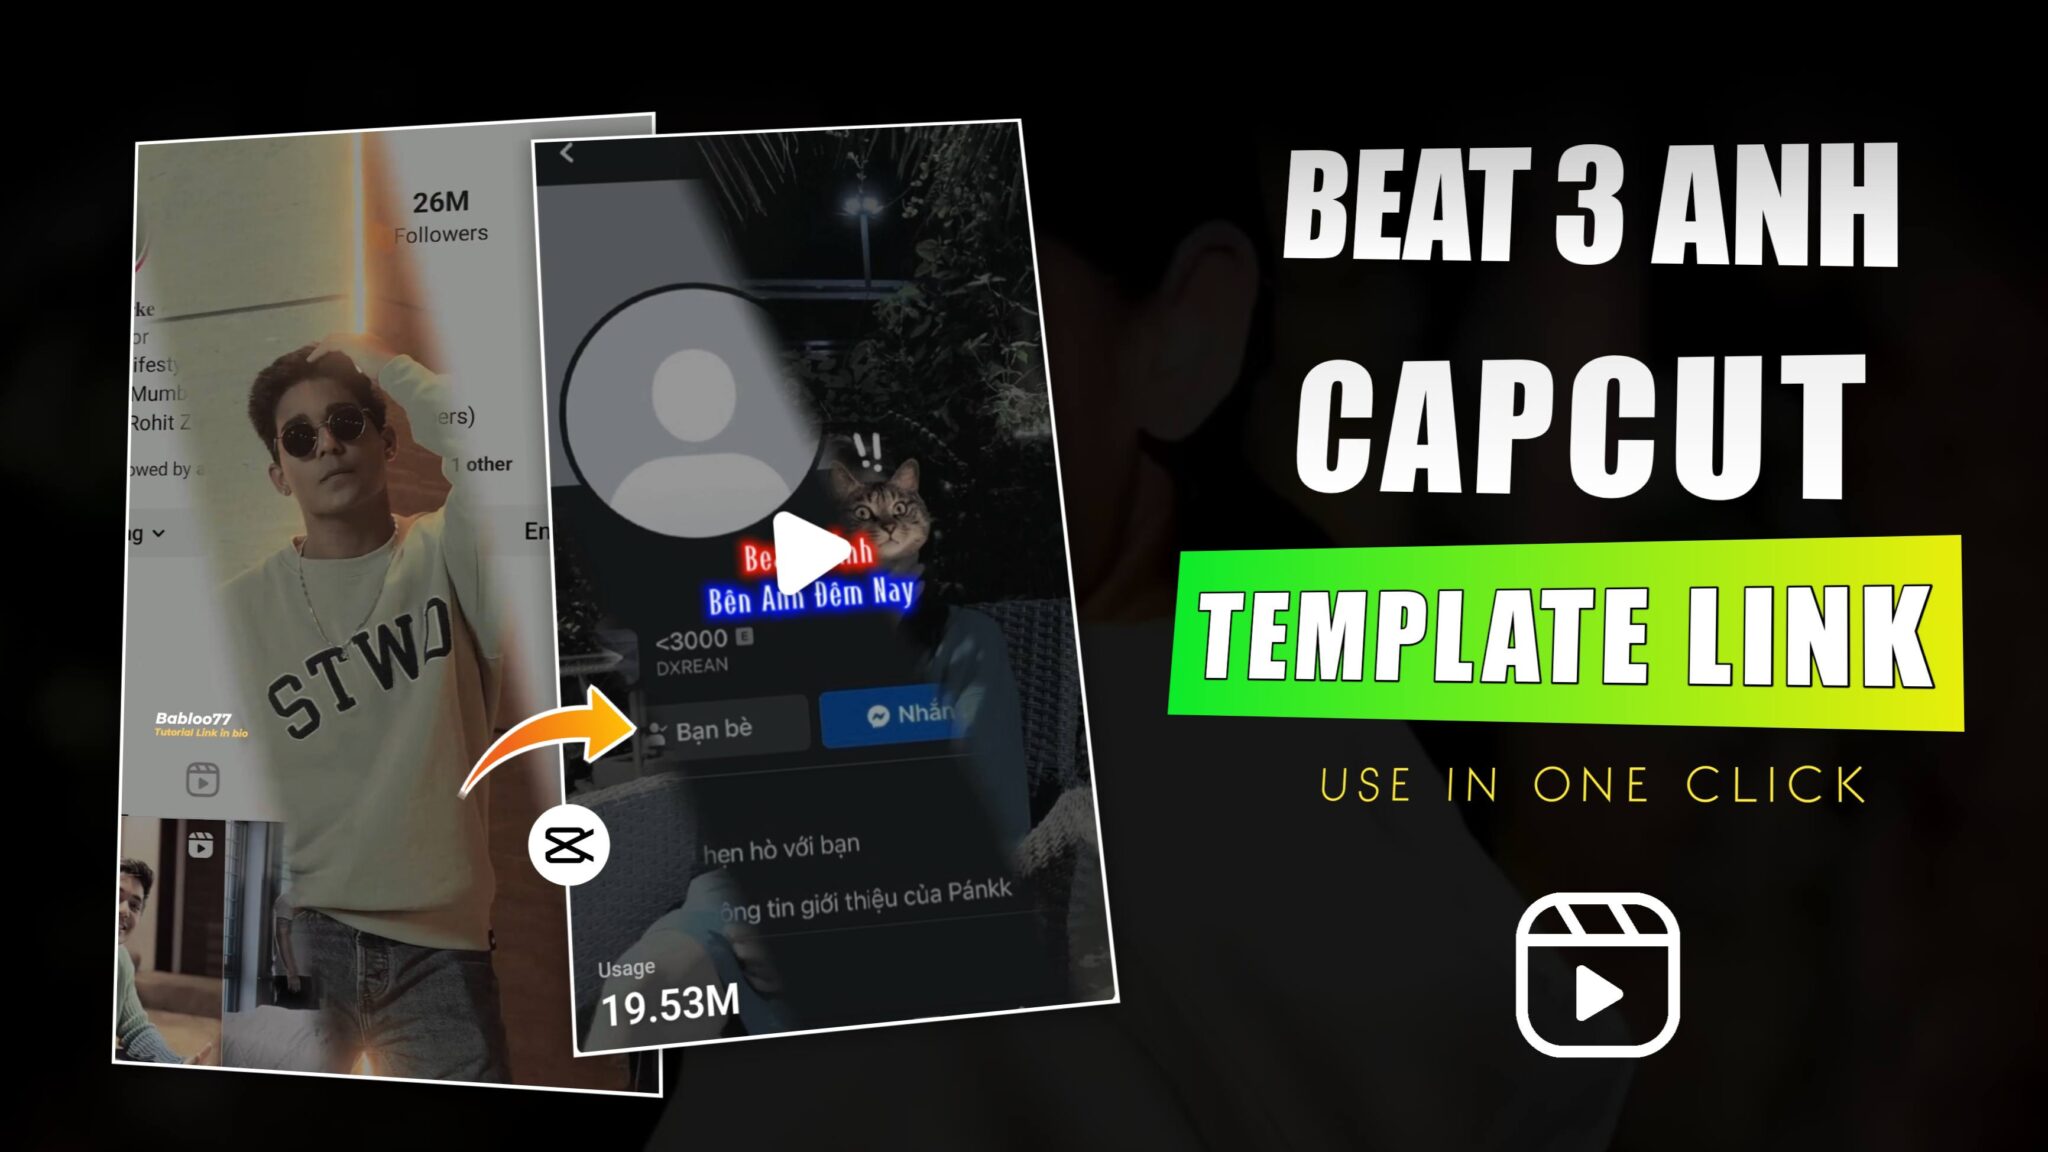 Beat 3 Anh by Nhung Flop Vk CapCut Template Beat 3 Anh Capcut Template